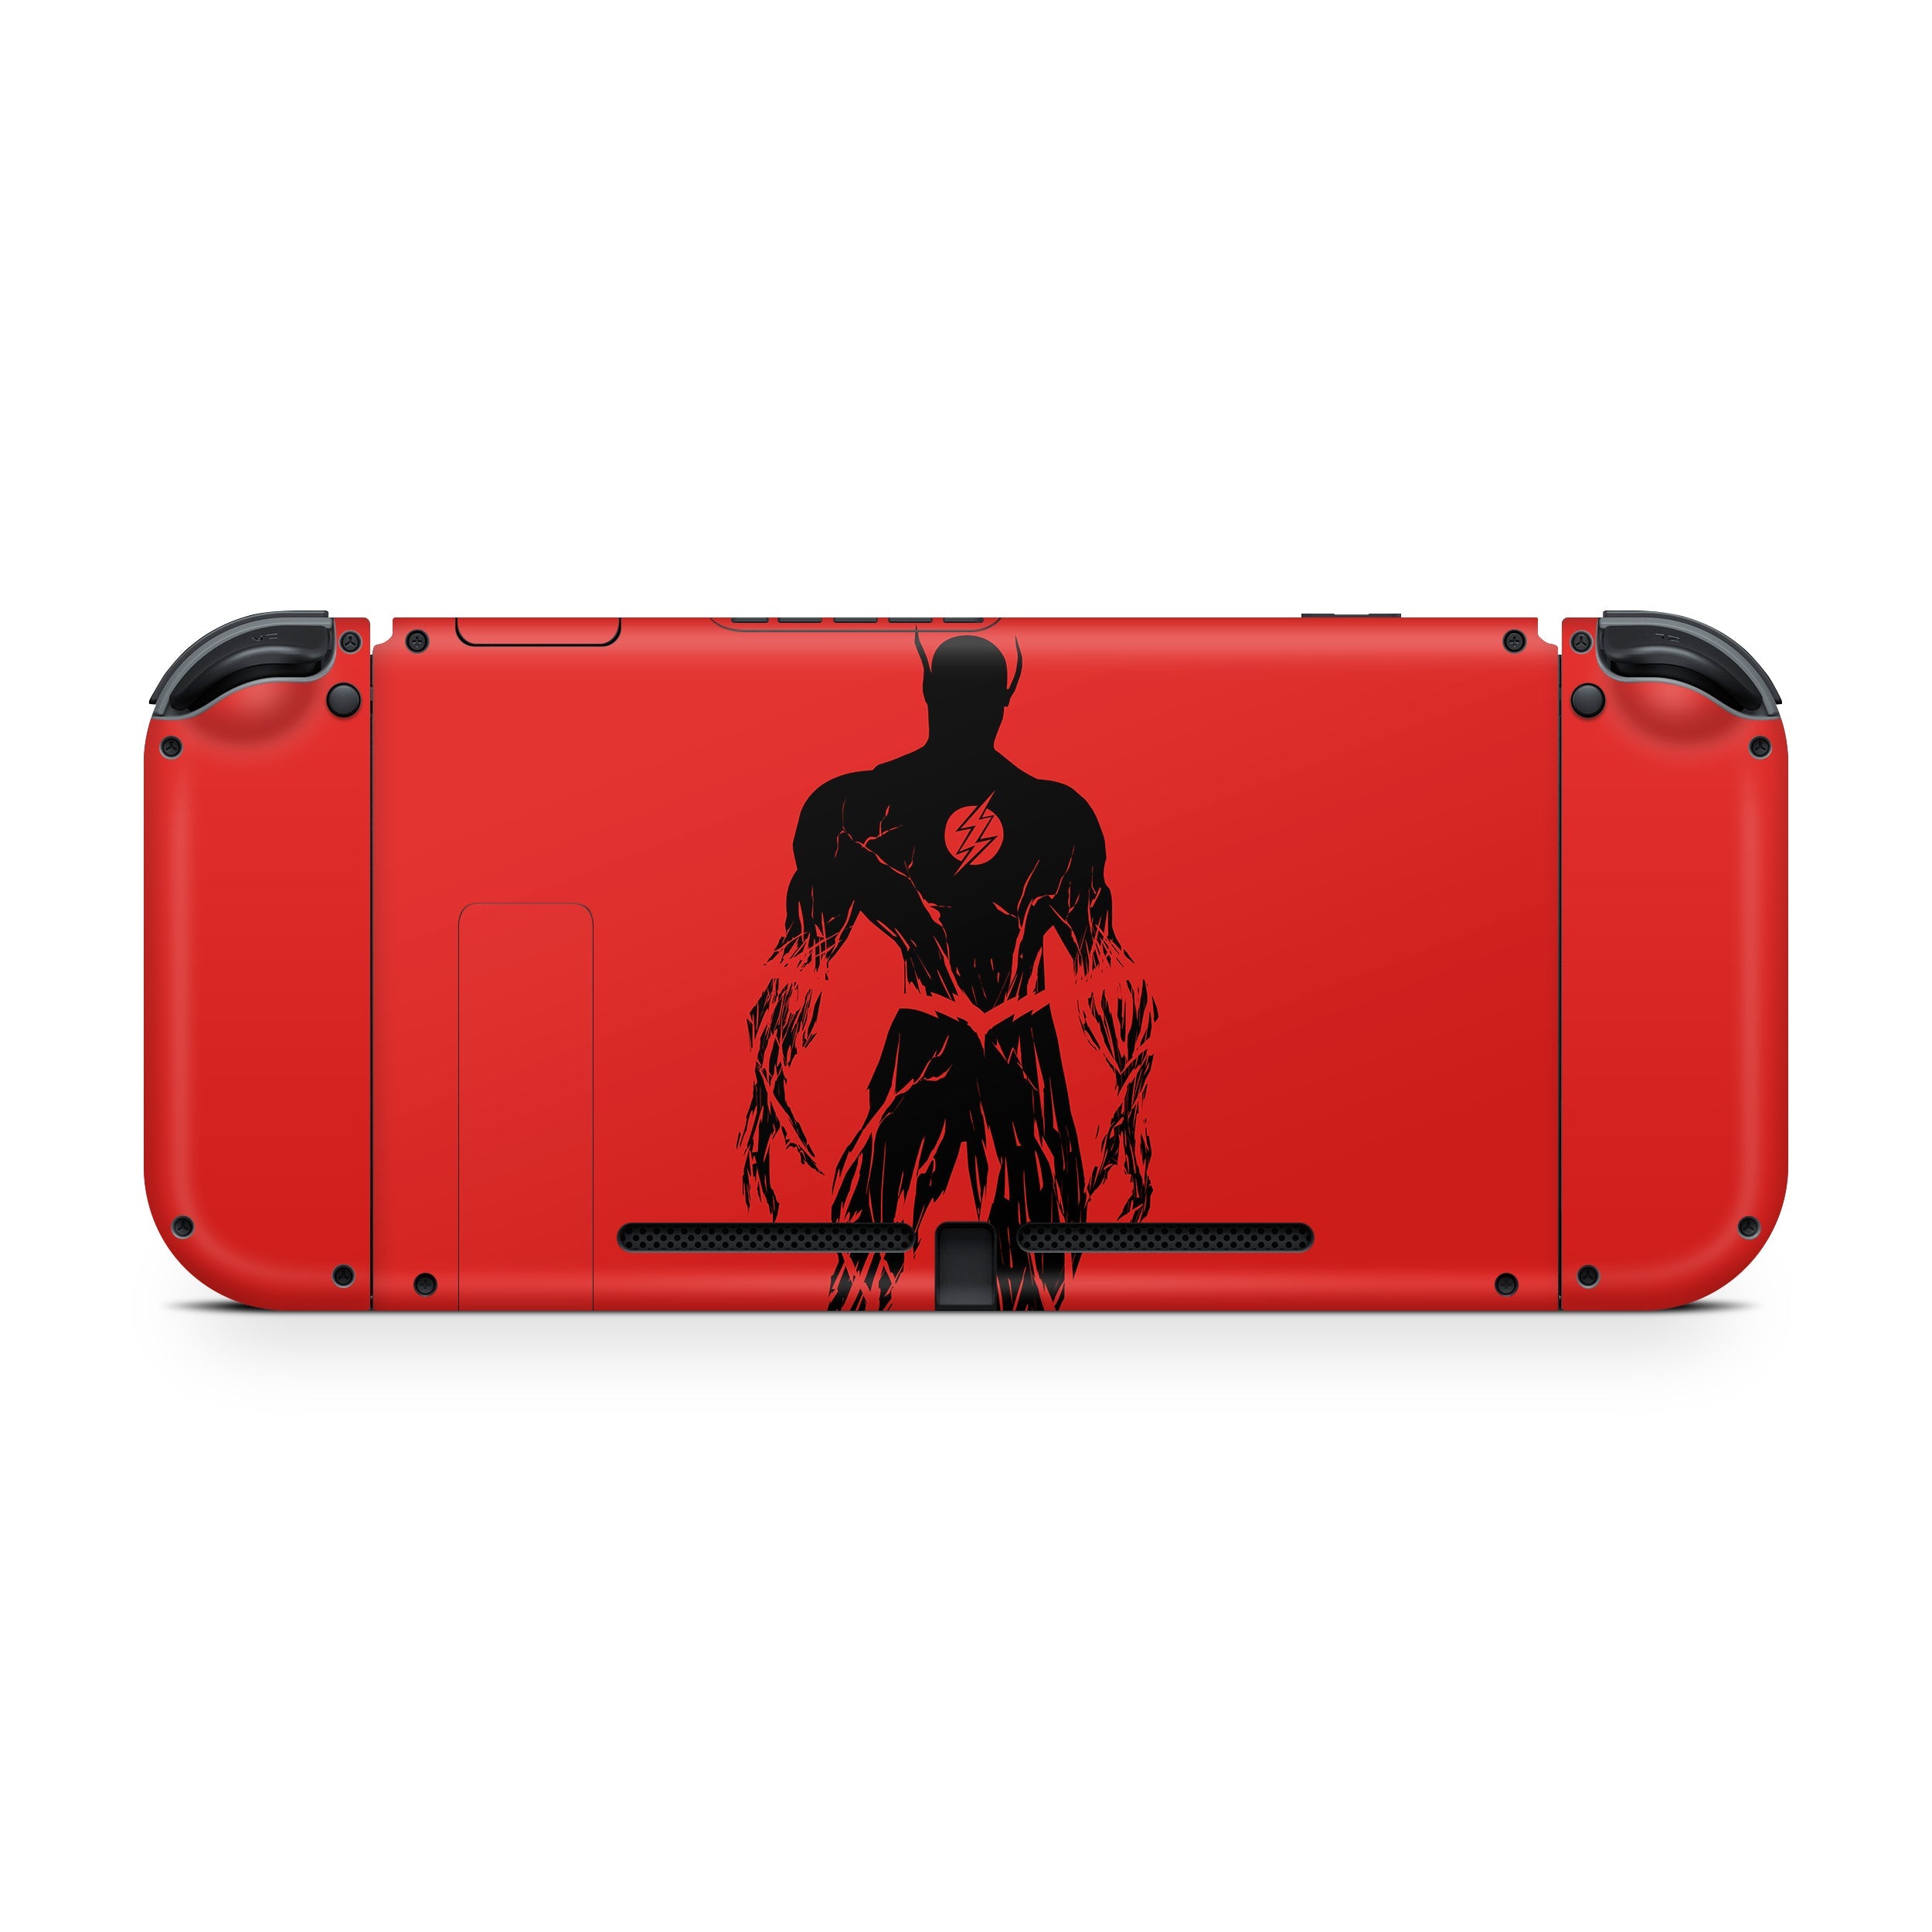 A video game skin featuring a DC Comics Flash design for the Nintendo Switch.